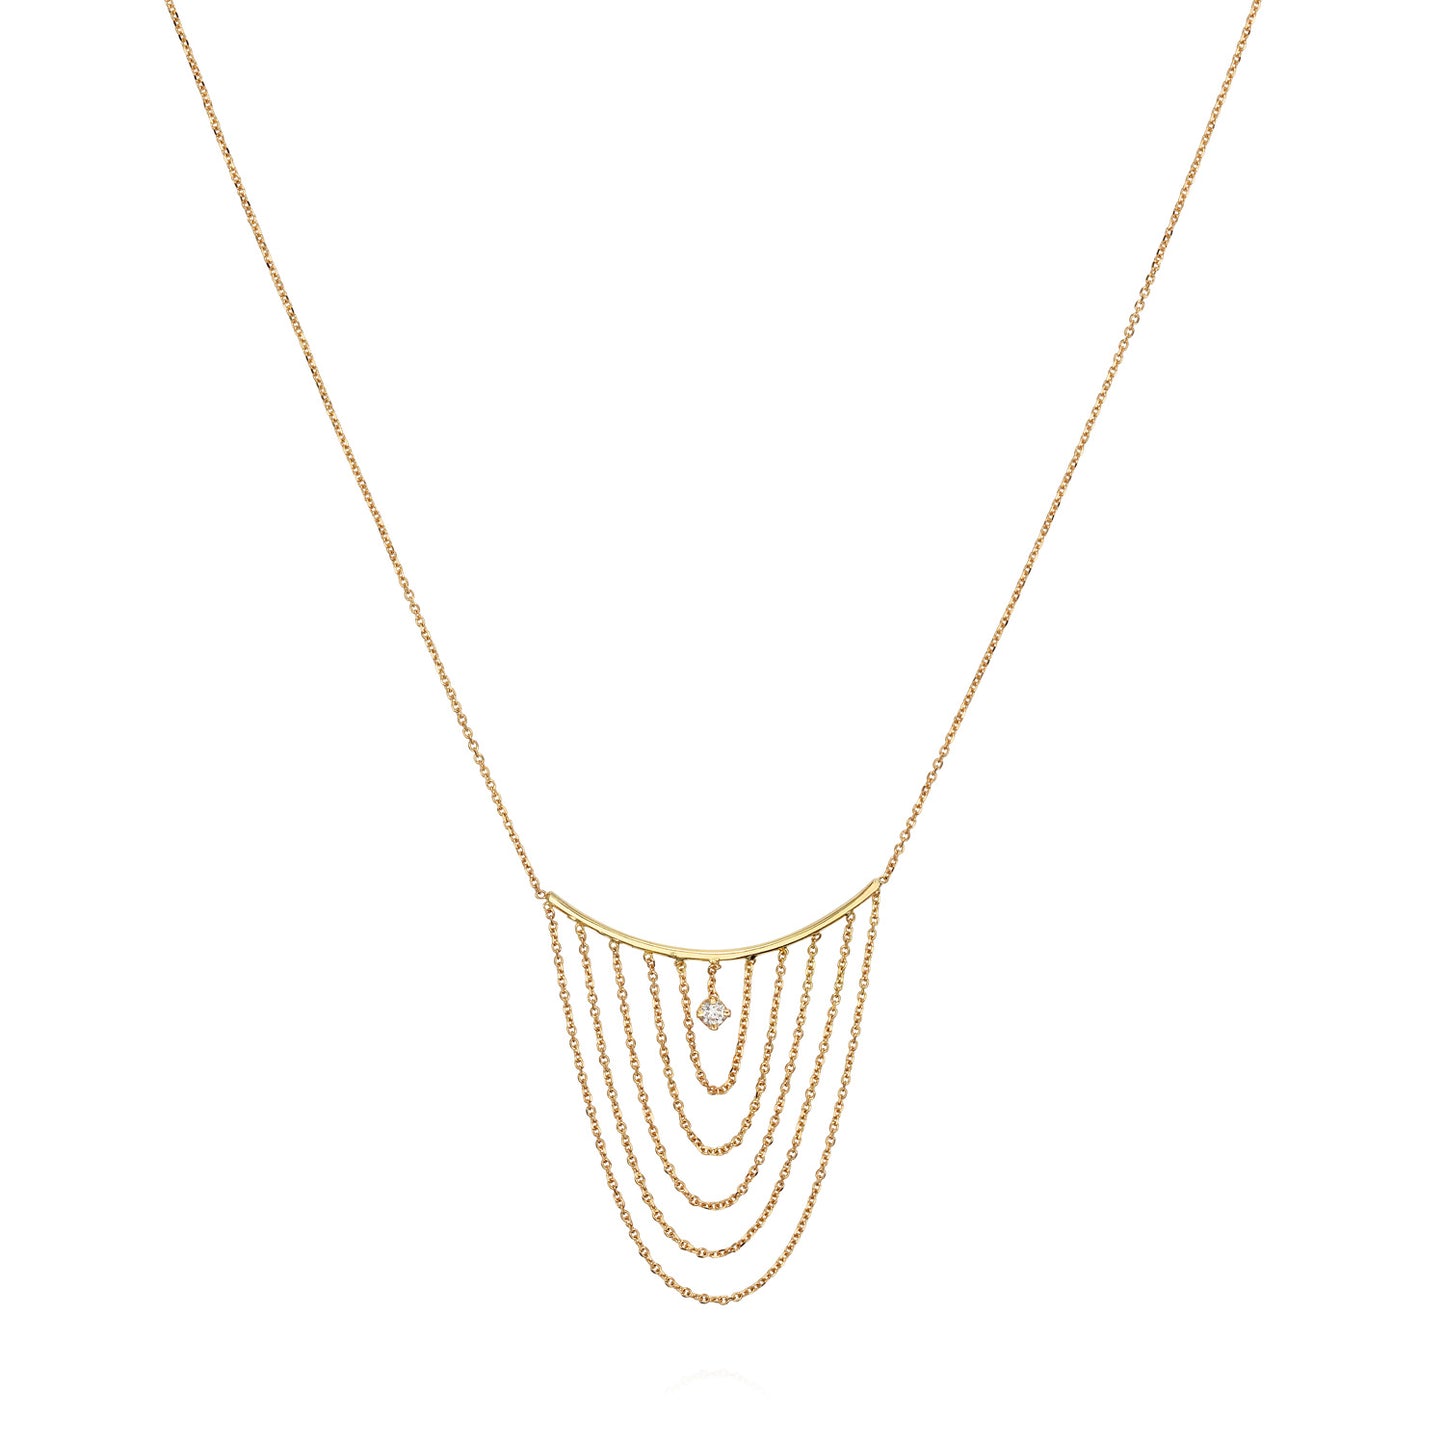 Sweet Pea 18ct yellow gold fine chain Nouveau Now necklace with looped chains and hanging white diamond close up. 